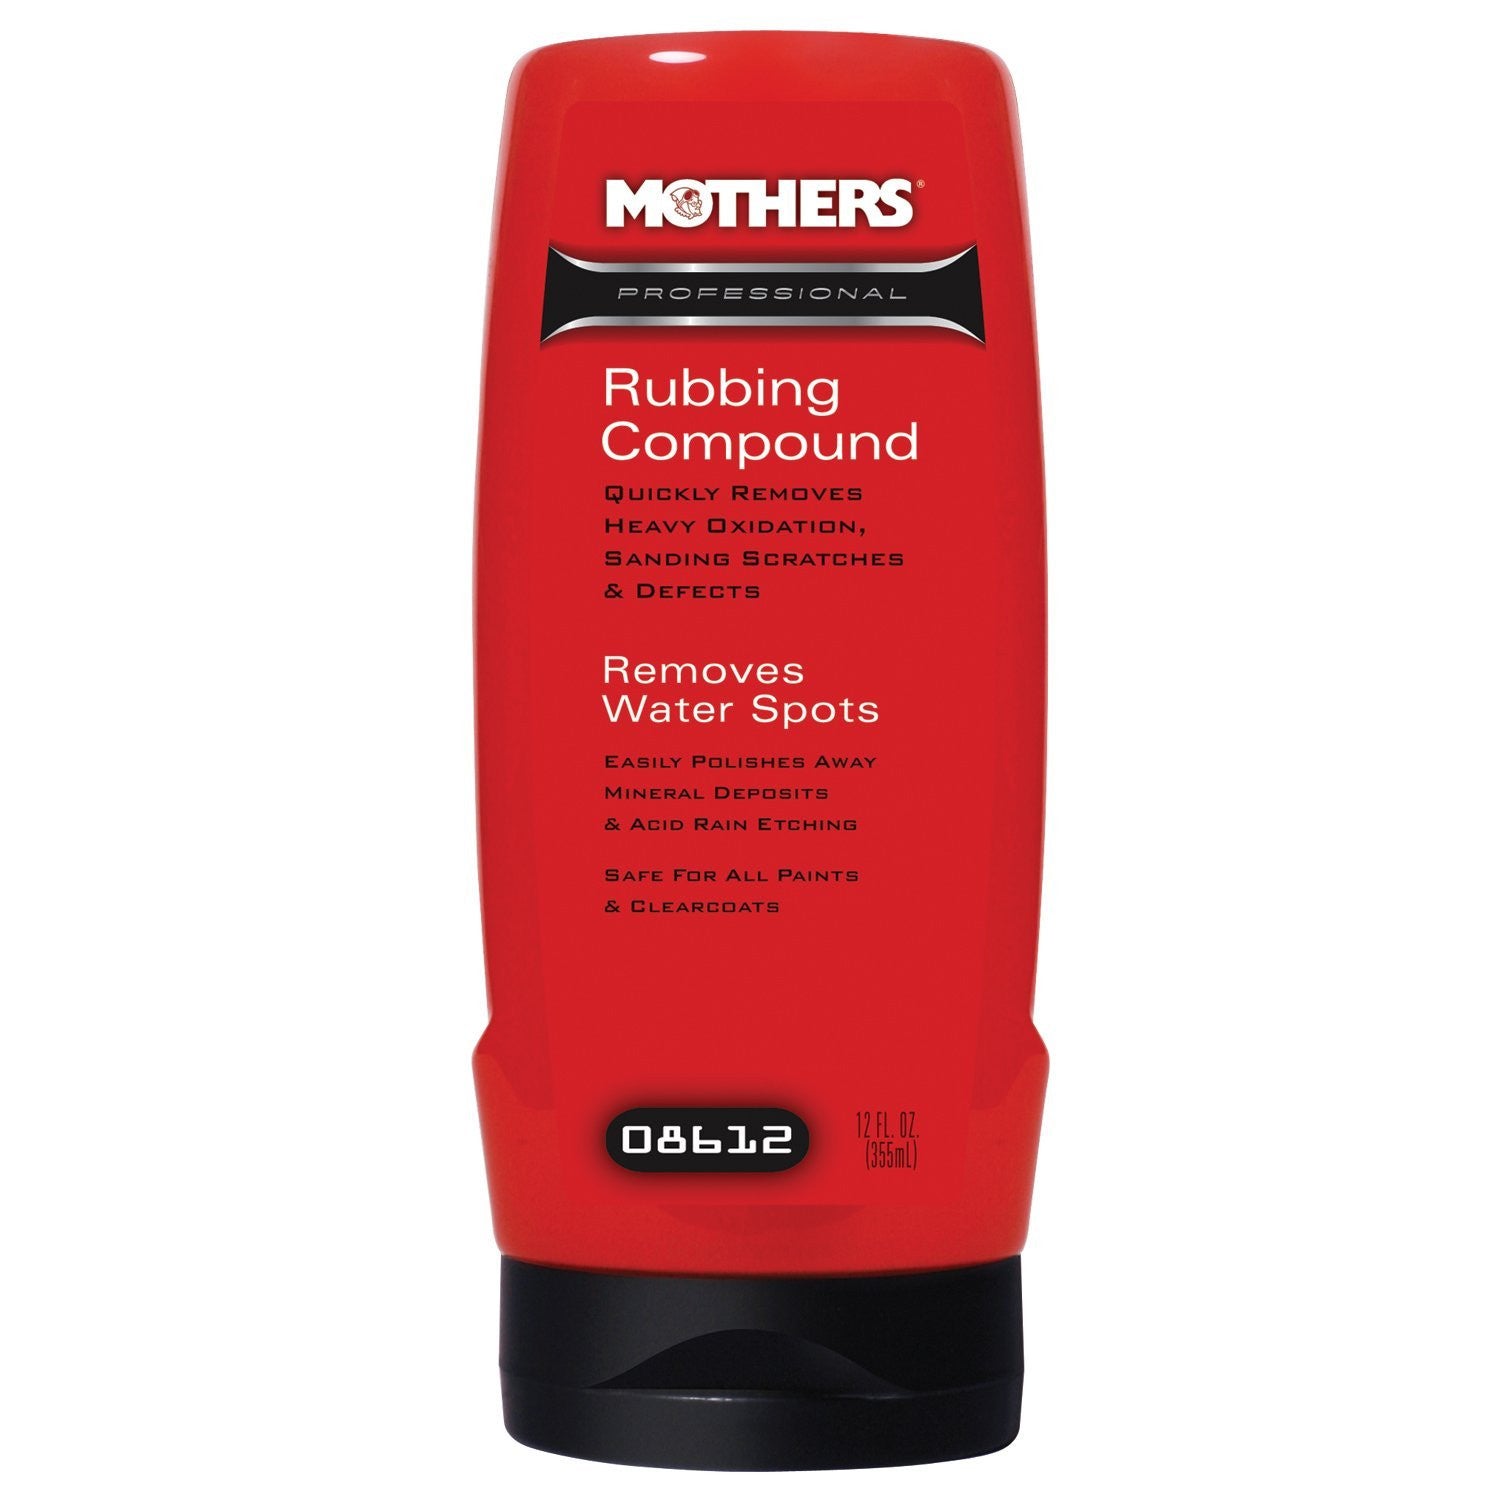 Mothers Professional Rubbing Compound 12 oz.